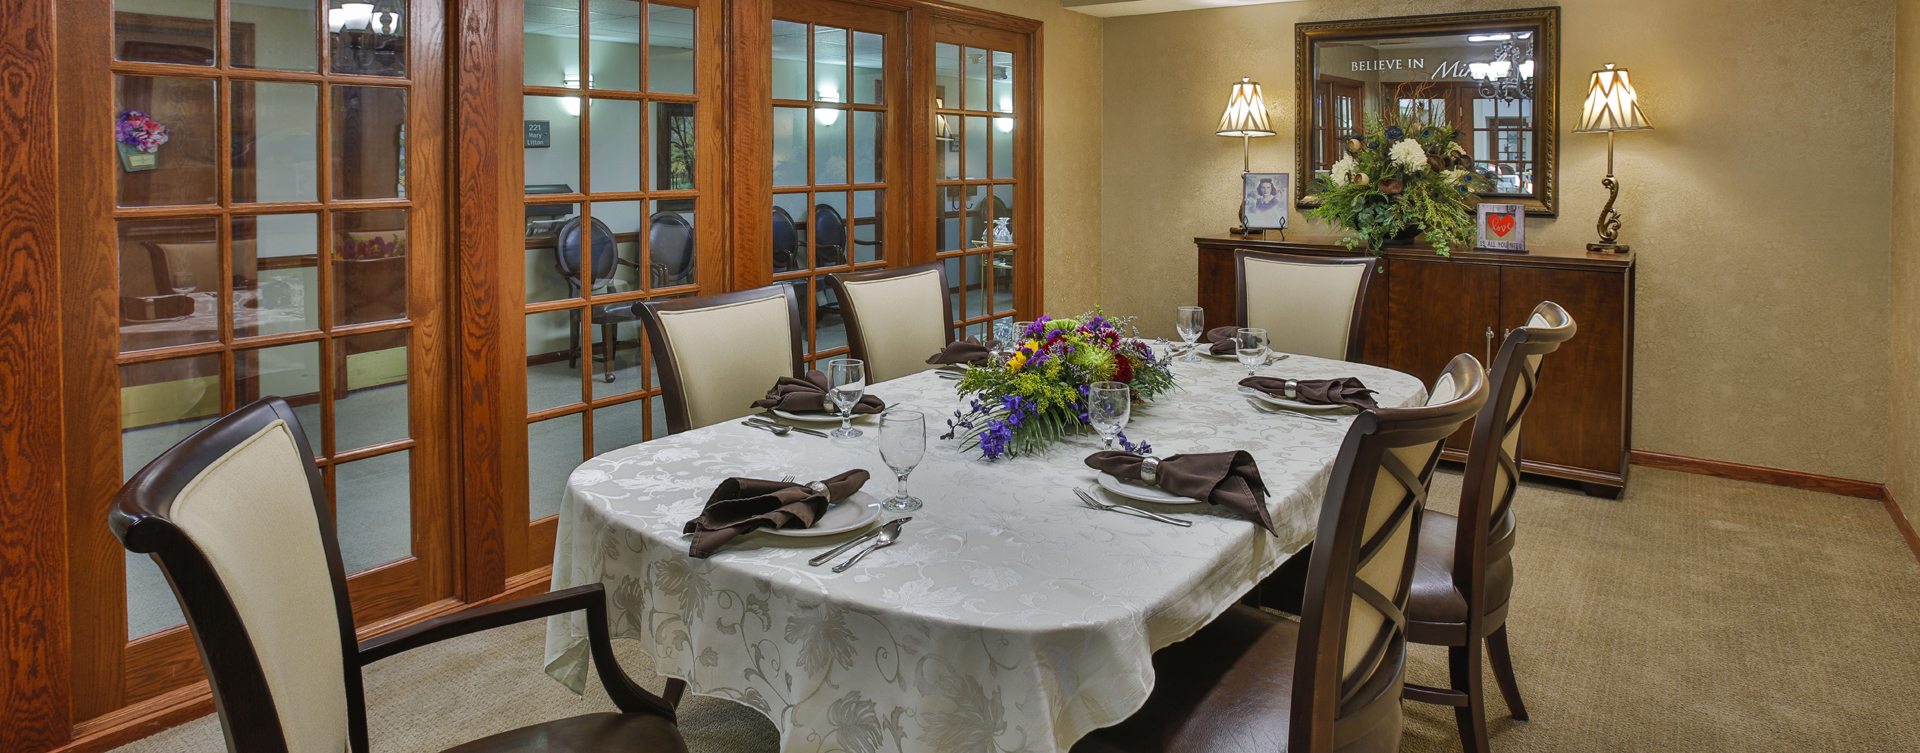 Celebrate special occasions in the private dining room at Bickford of Peoria